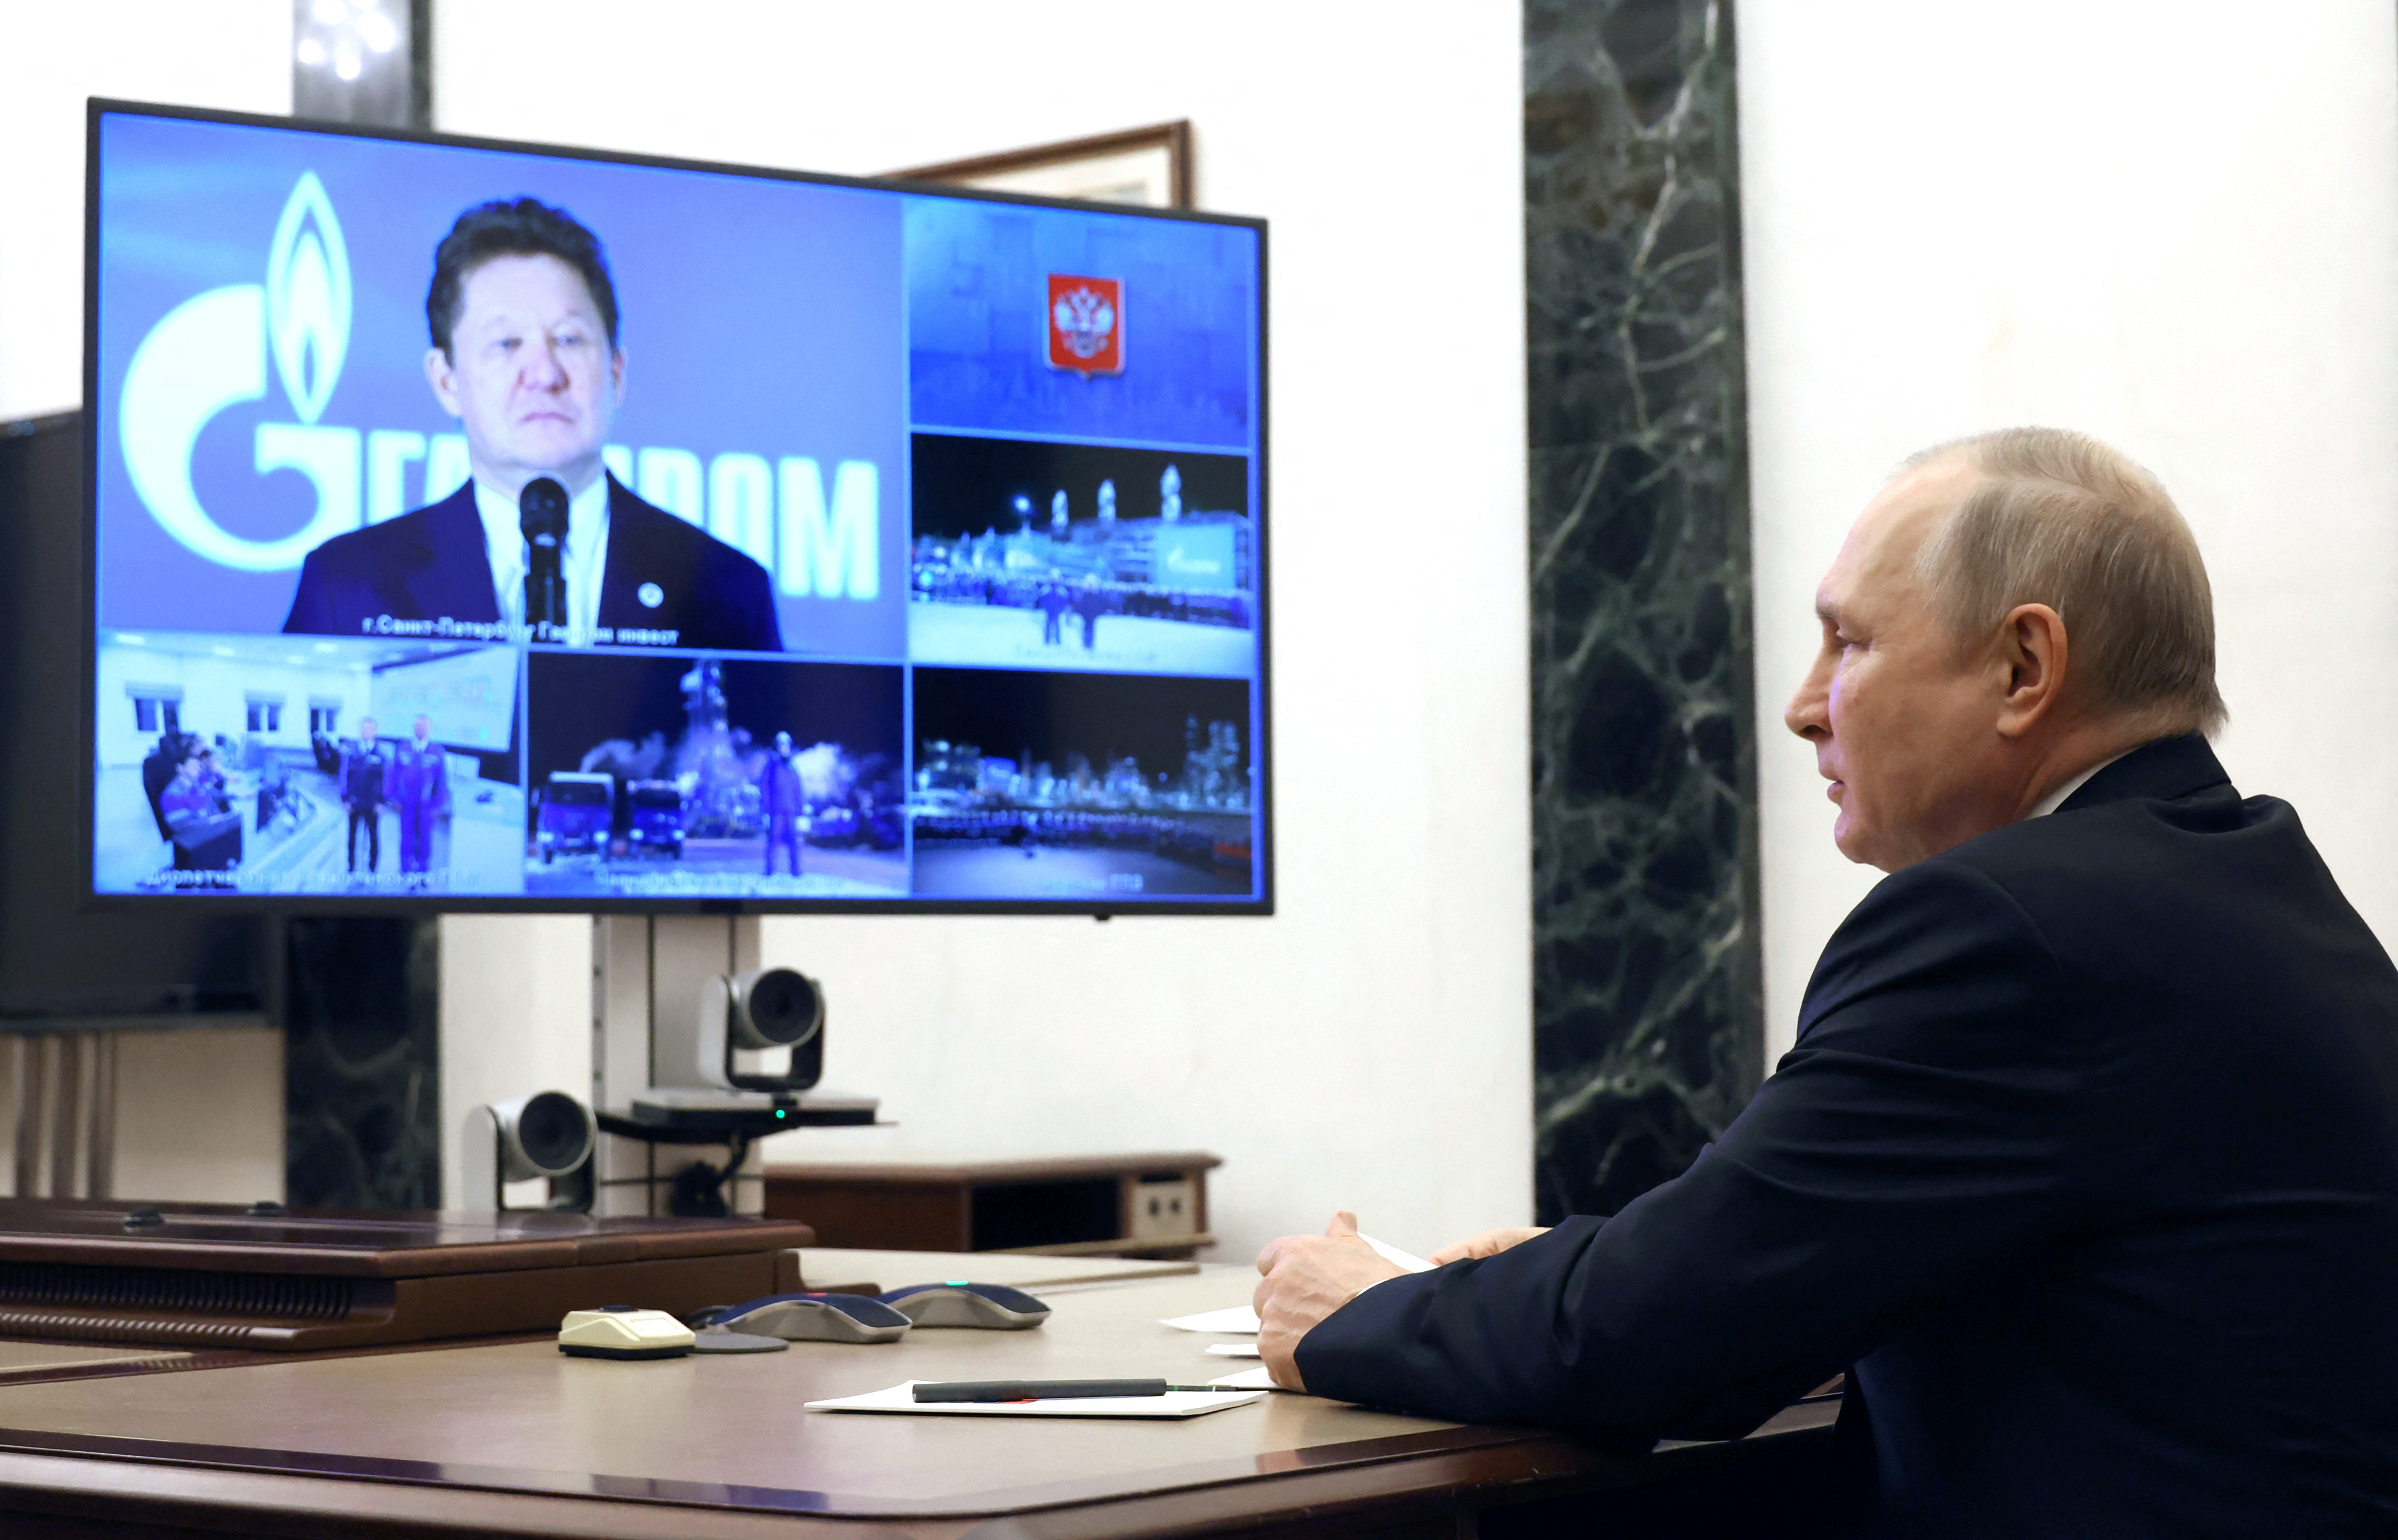 Russian President Putin takes part in a ceremony launching production at a gas field, via a video link in Moscow